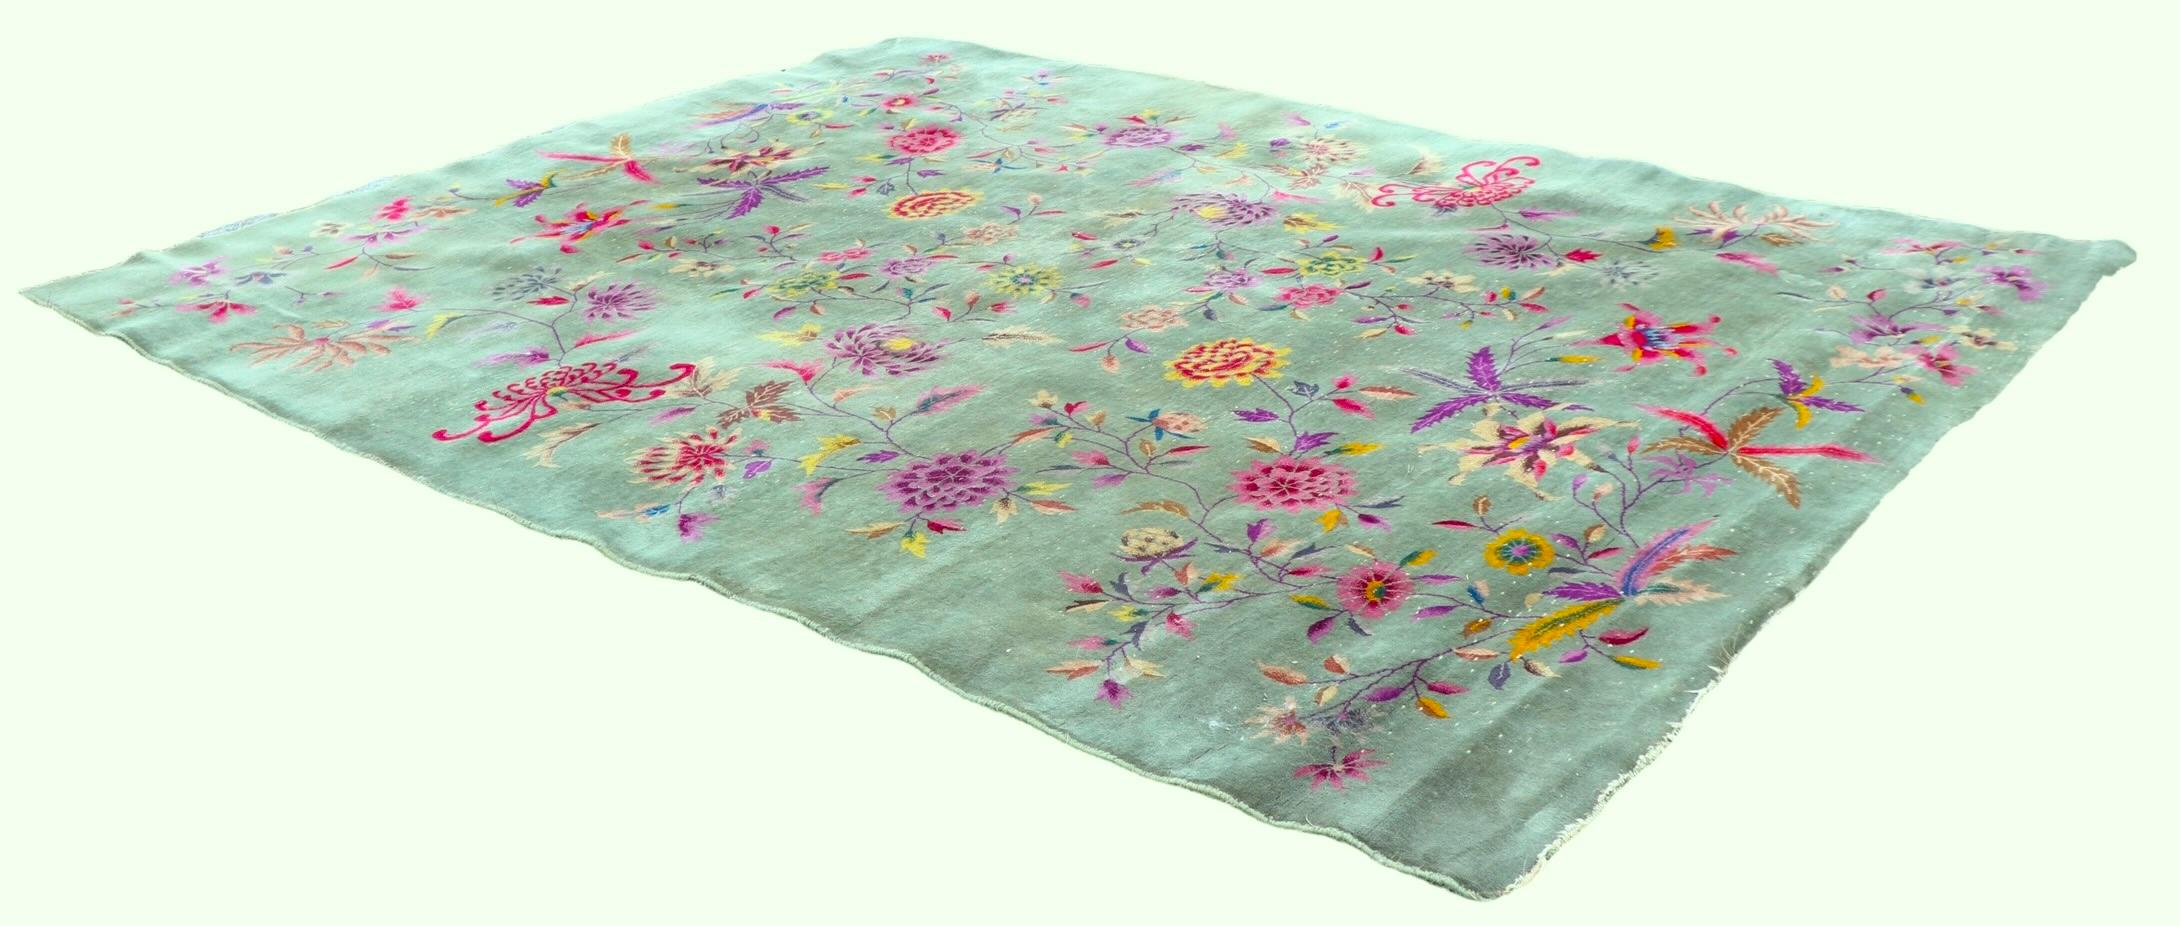 Art Deco Chinese Rug with Floral Motif c. 1920/1930's For Sale 12